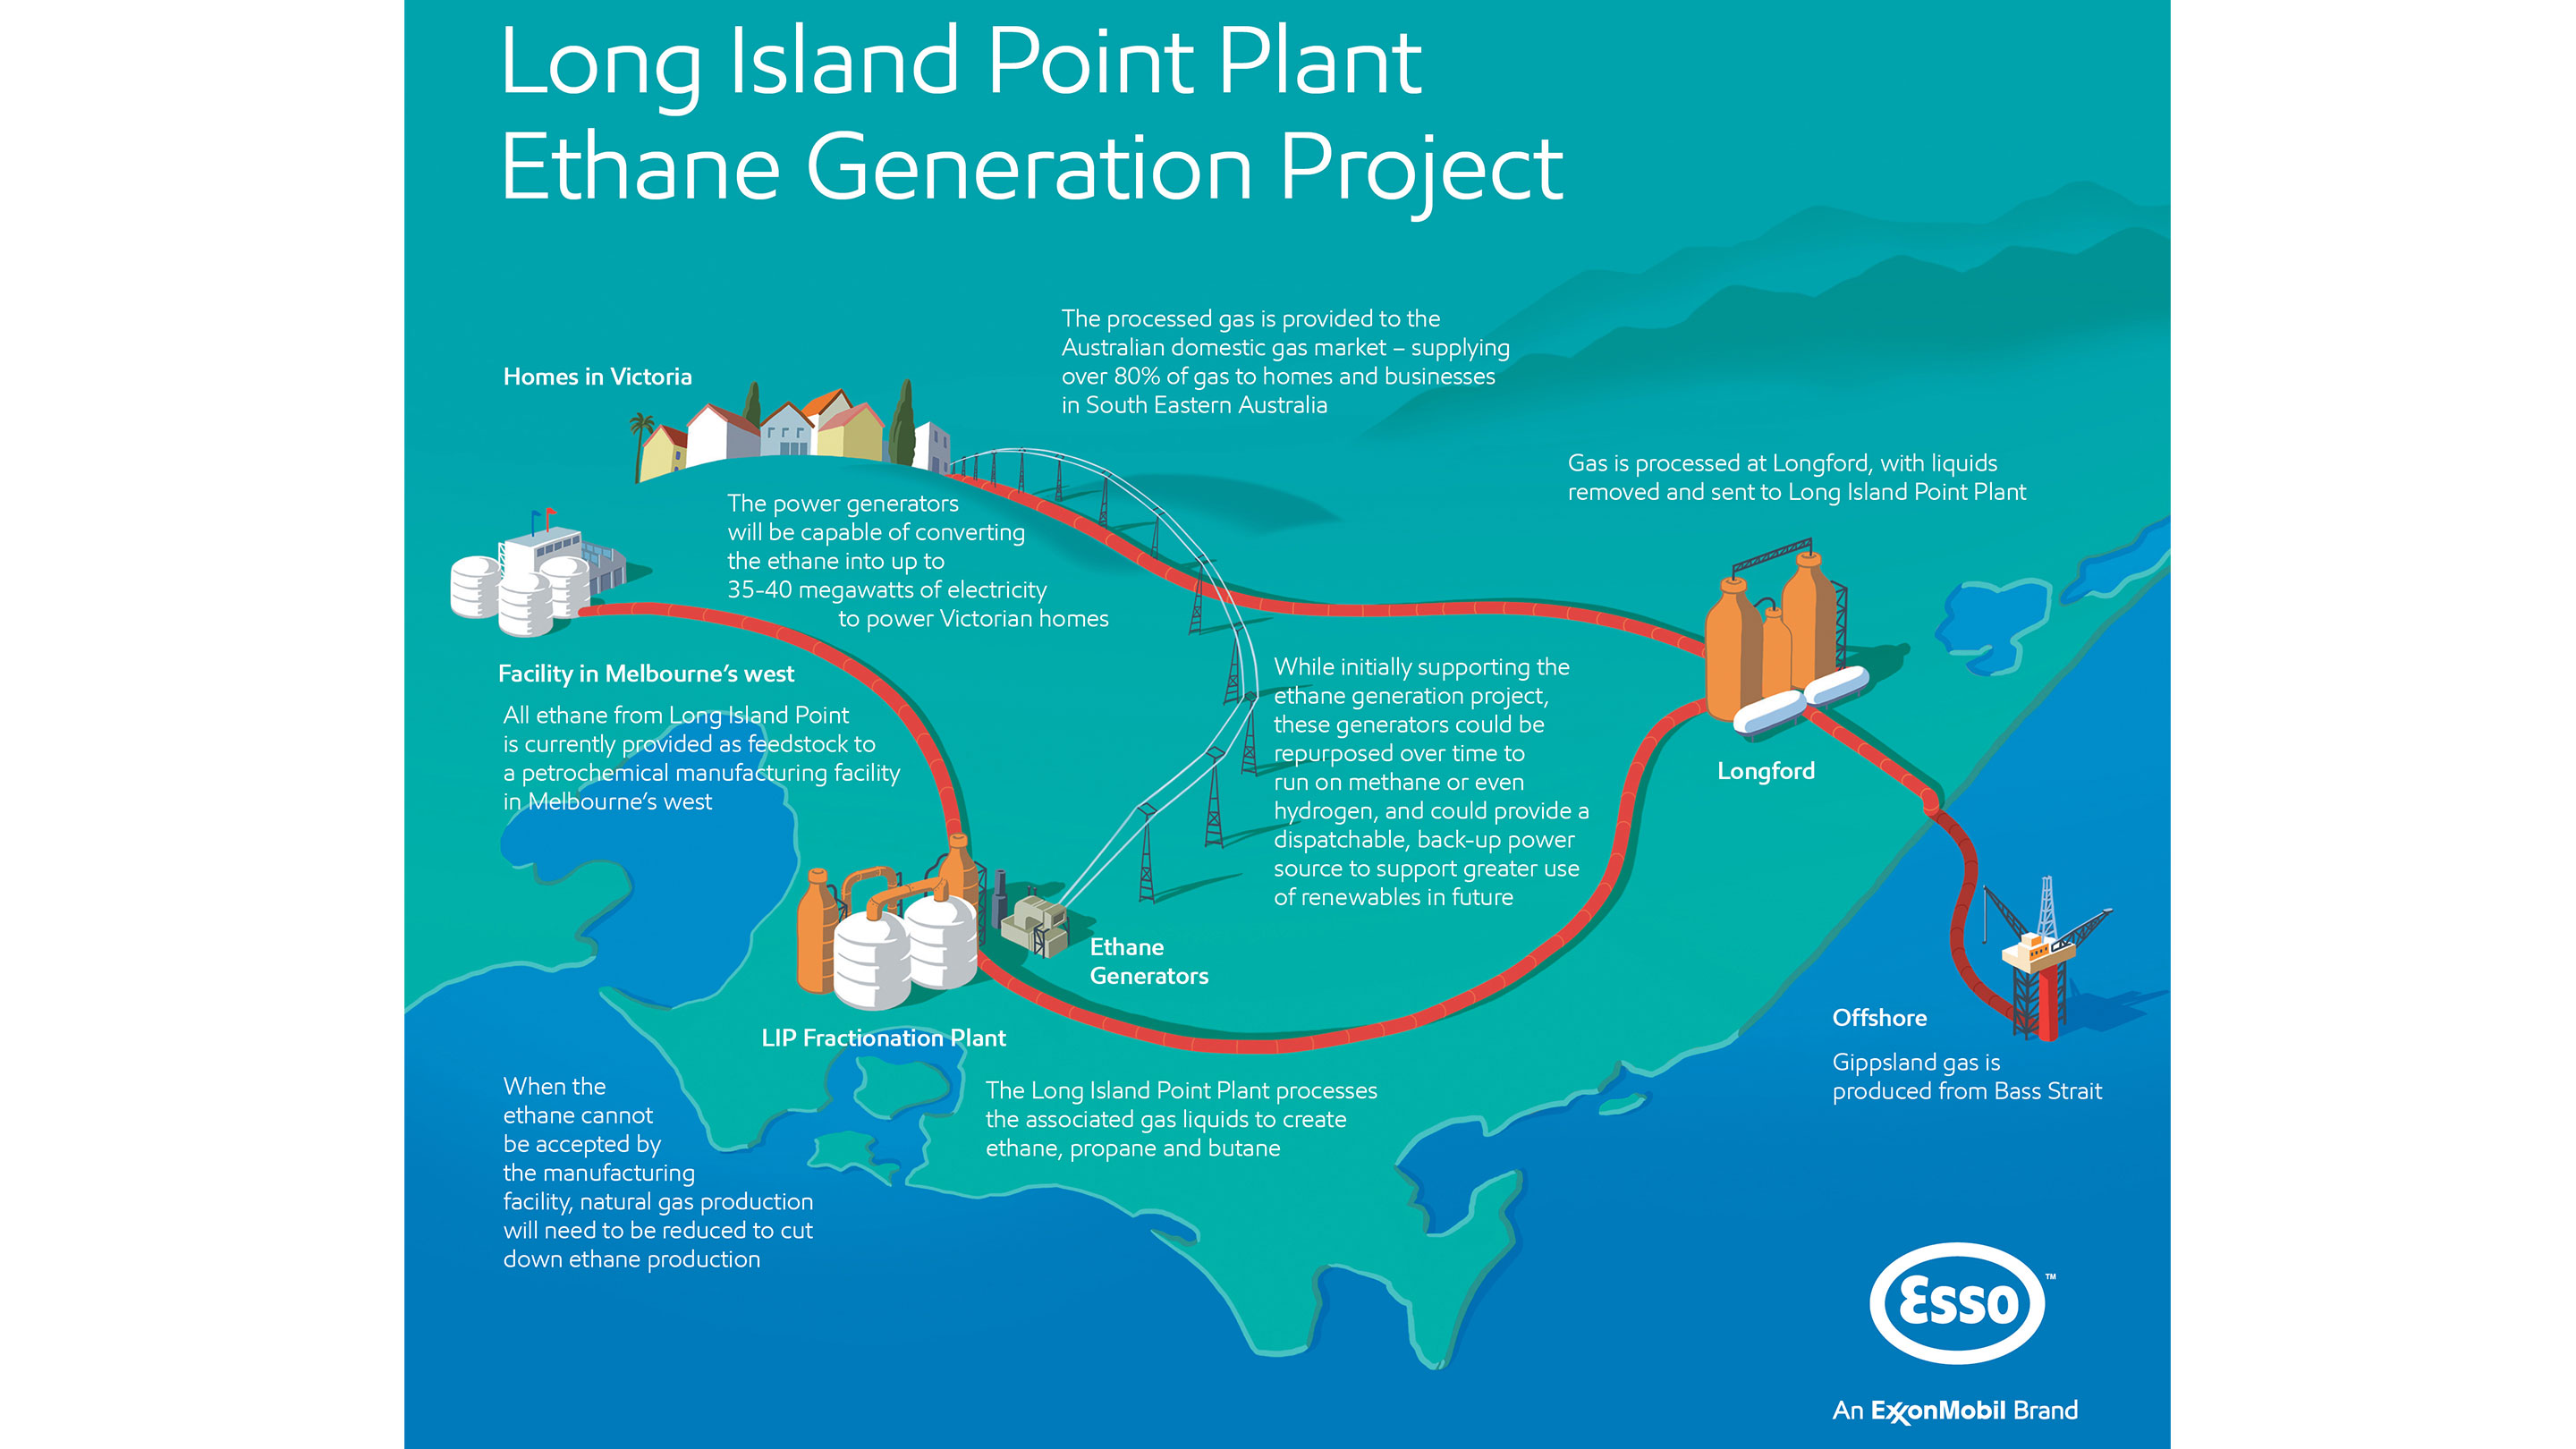 The Long Island Point Plant Ethane Generation Project